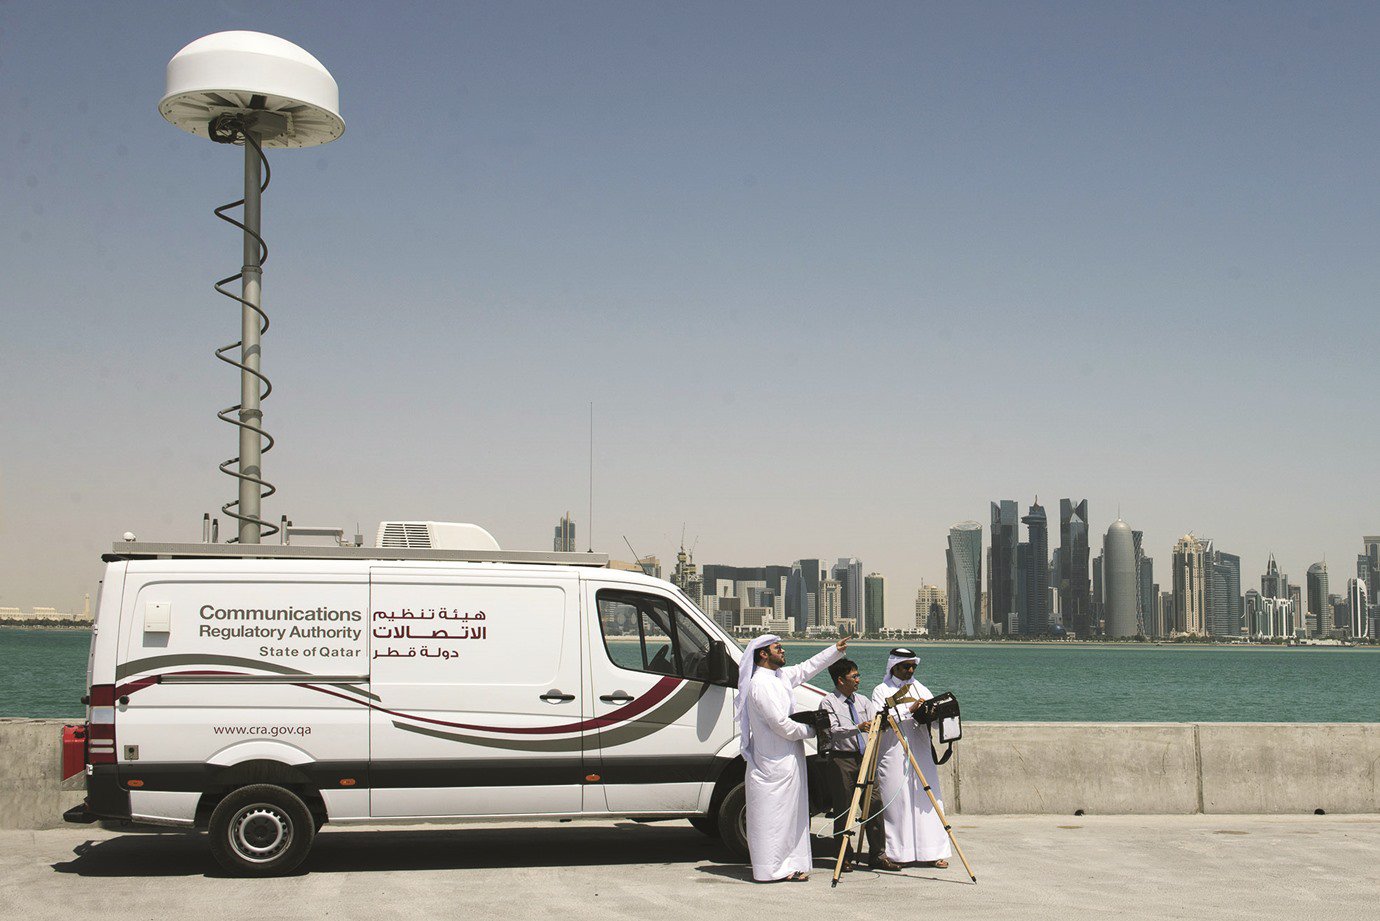 Qatar's mobile networks have high level of access and safety